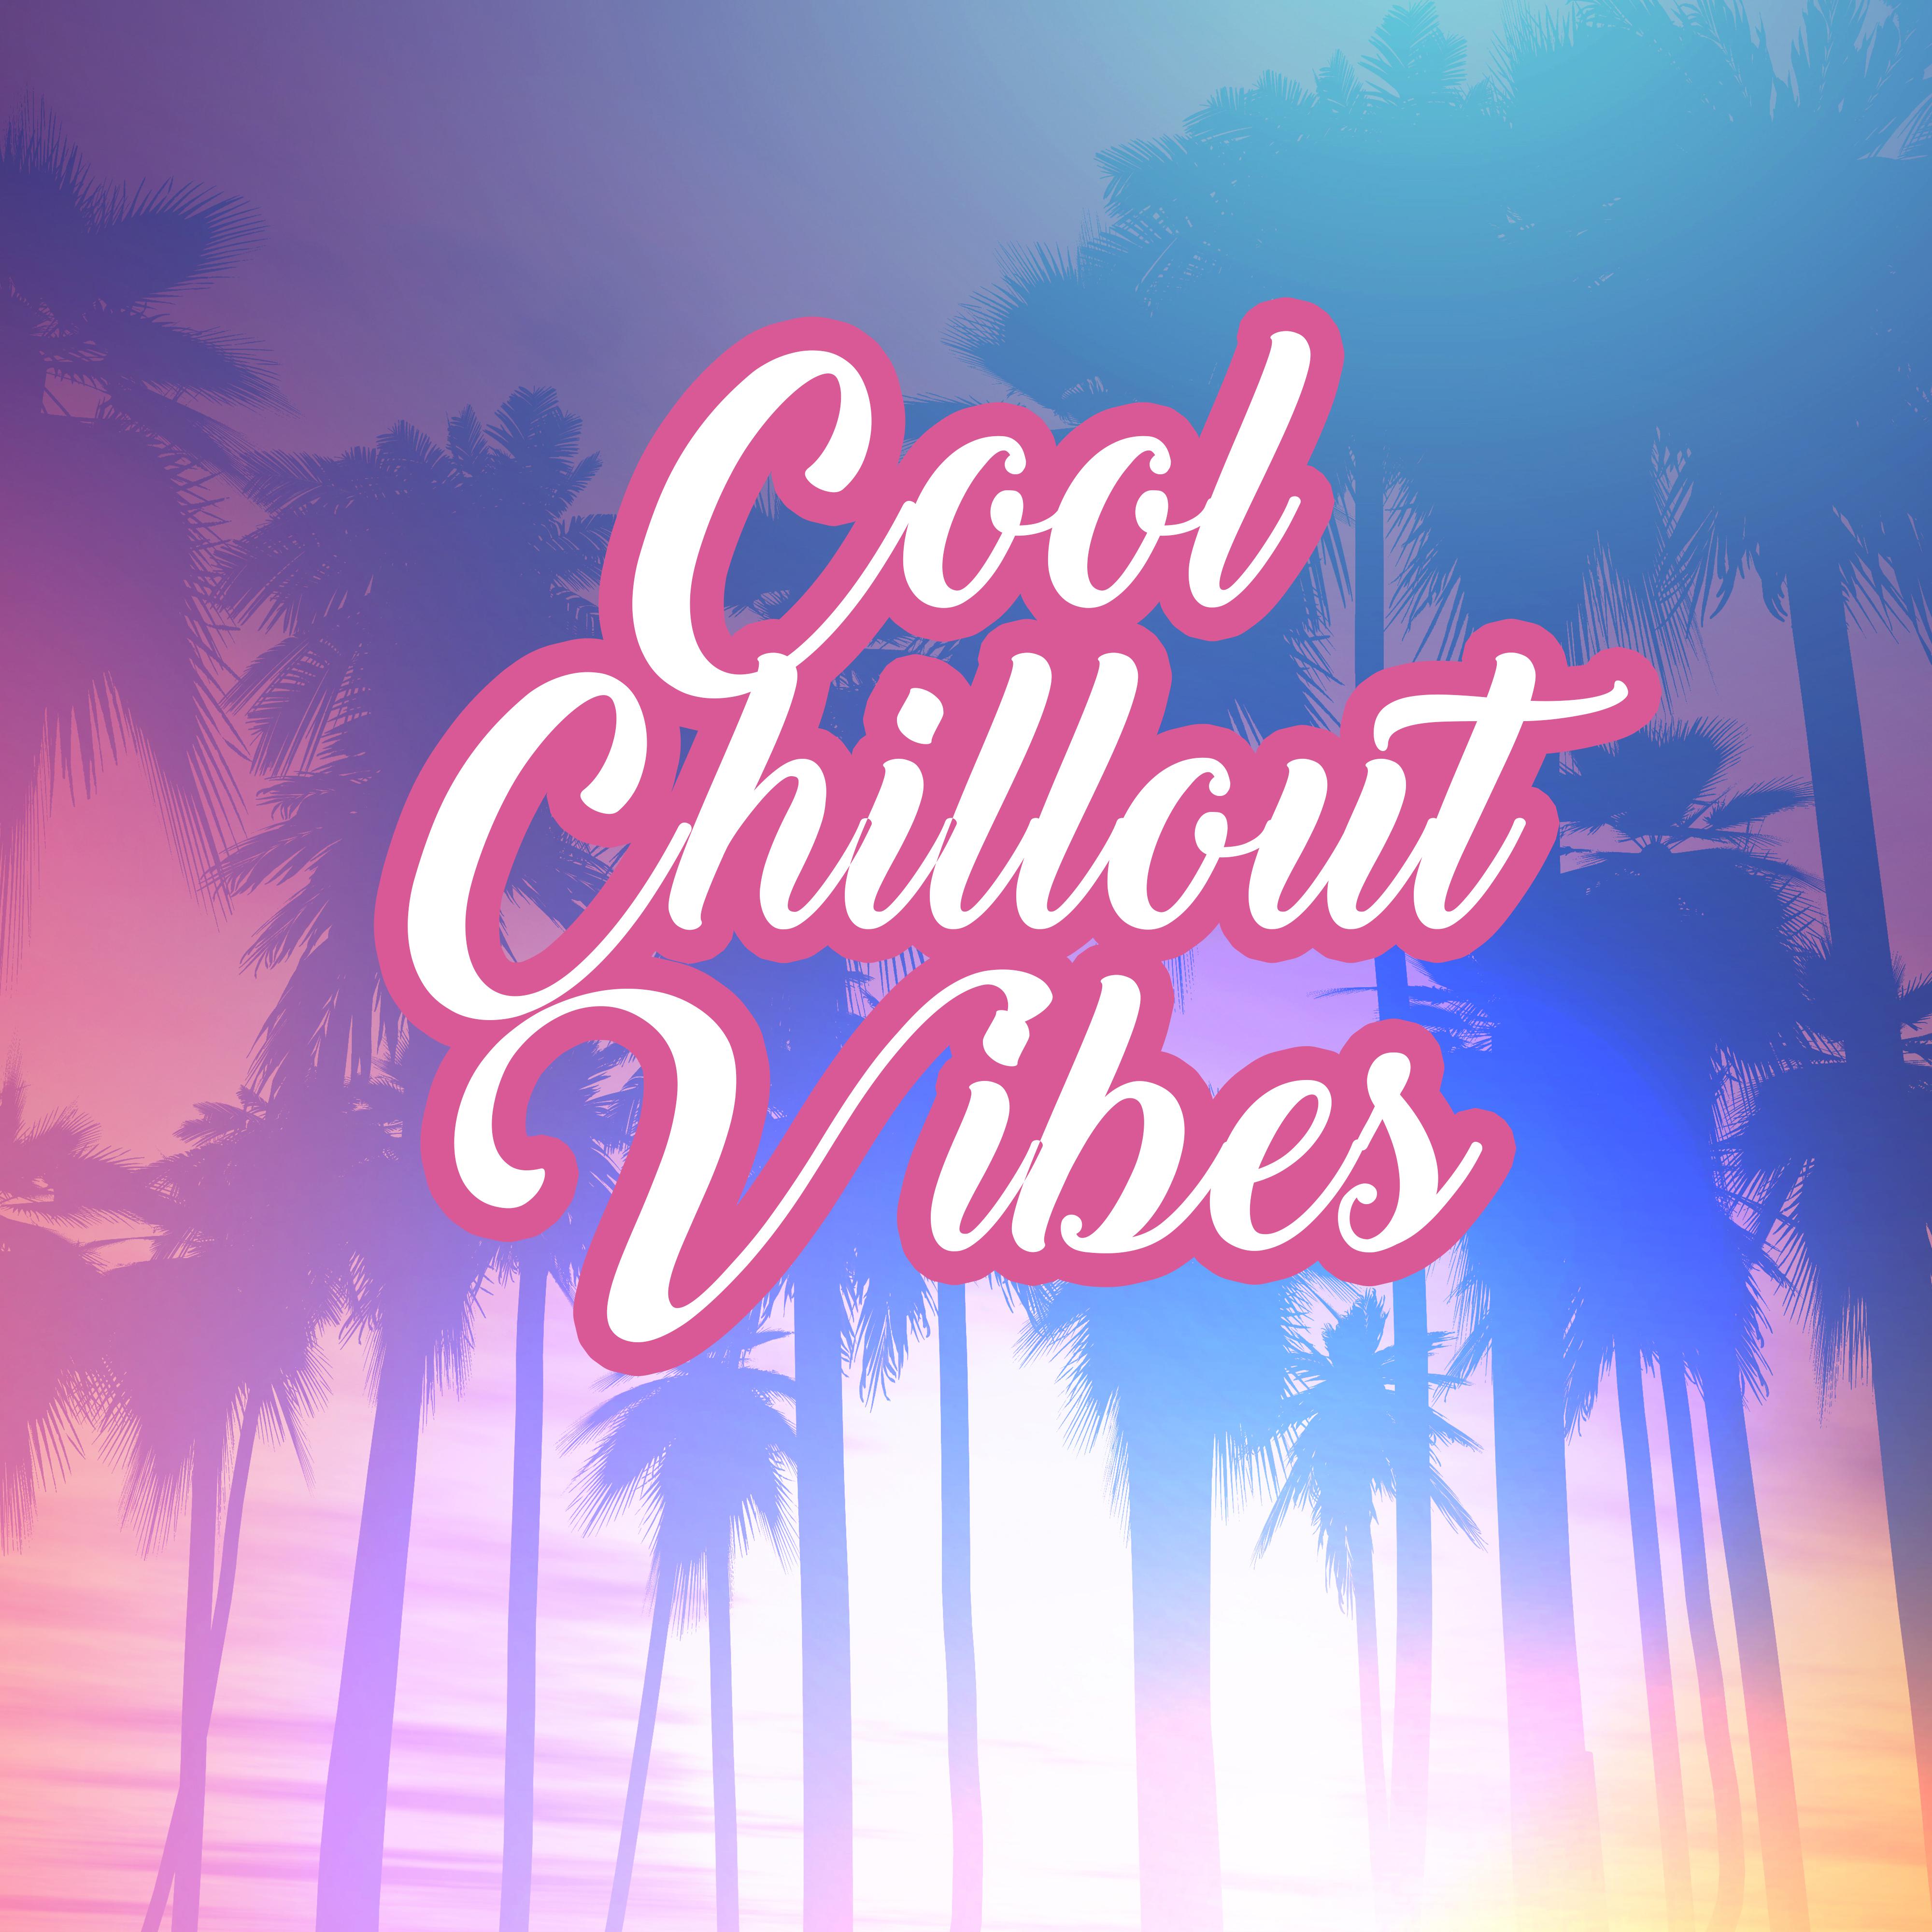 Cool Chillout Vibes